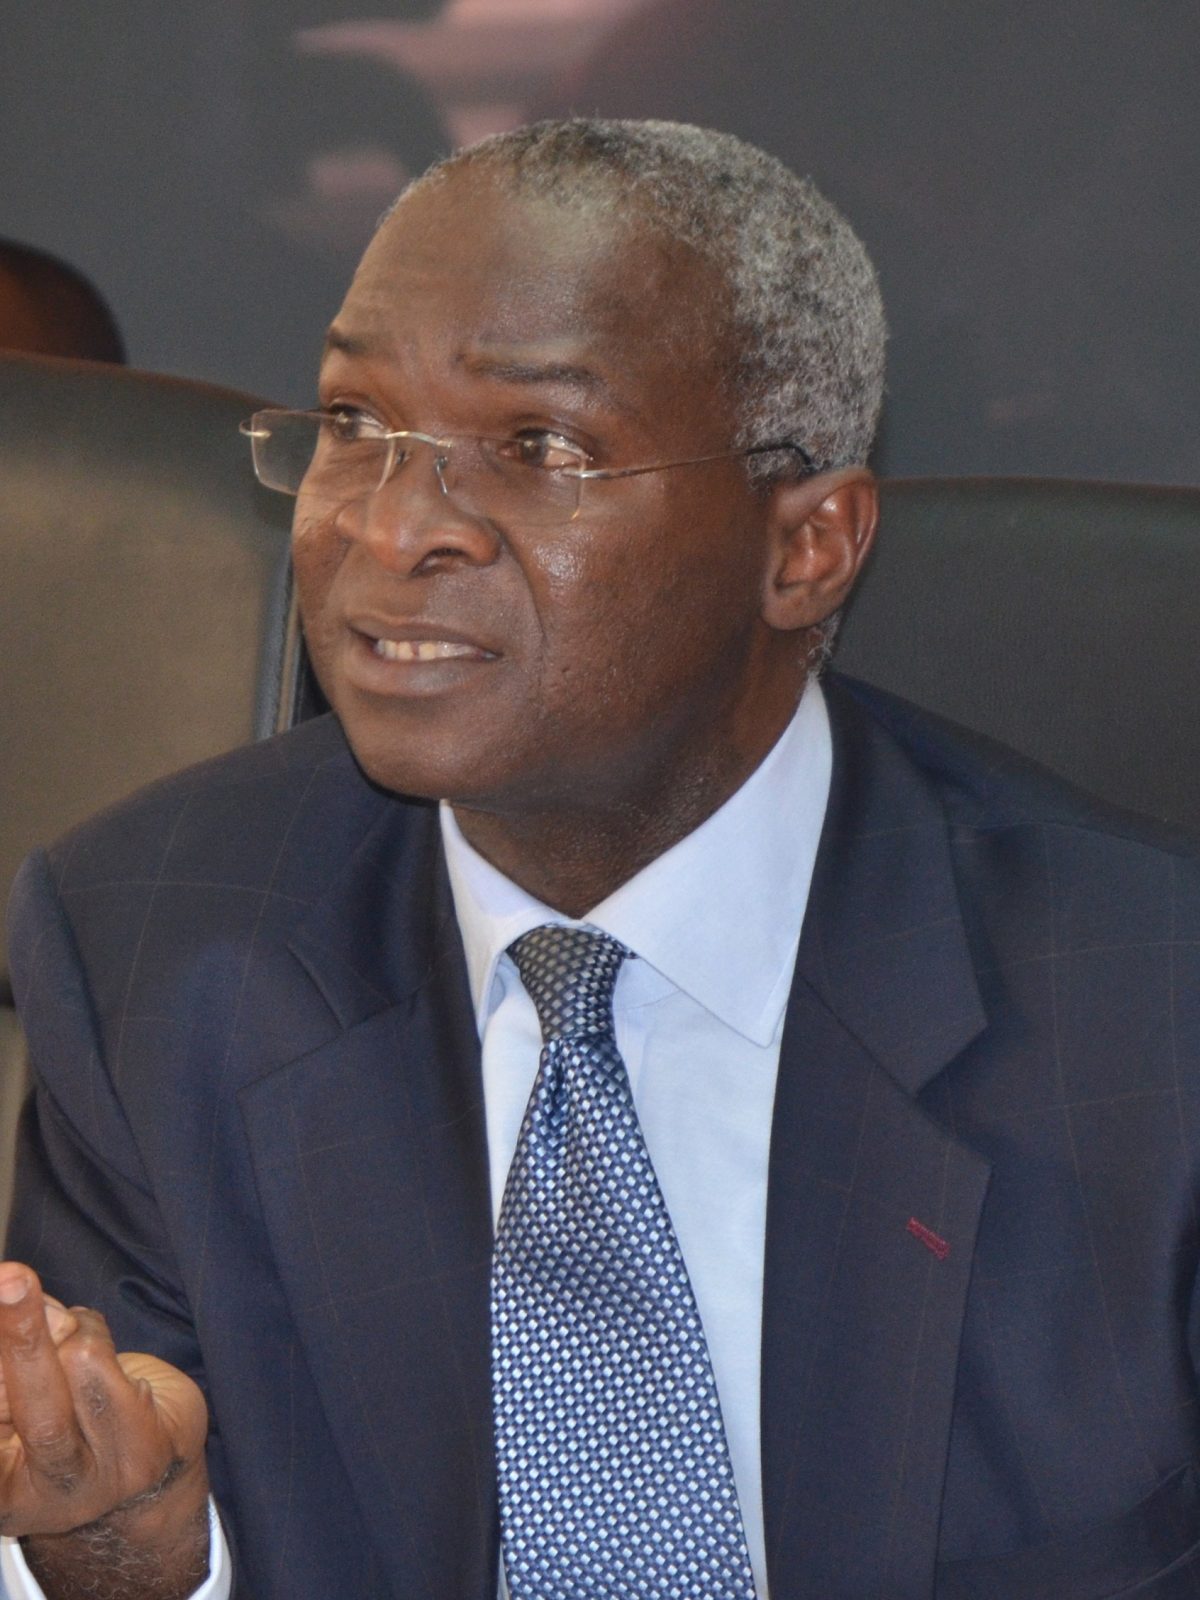 Inscribing Coat Of Arms On National Flag A Misuse Of National Colours – Fashola